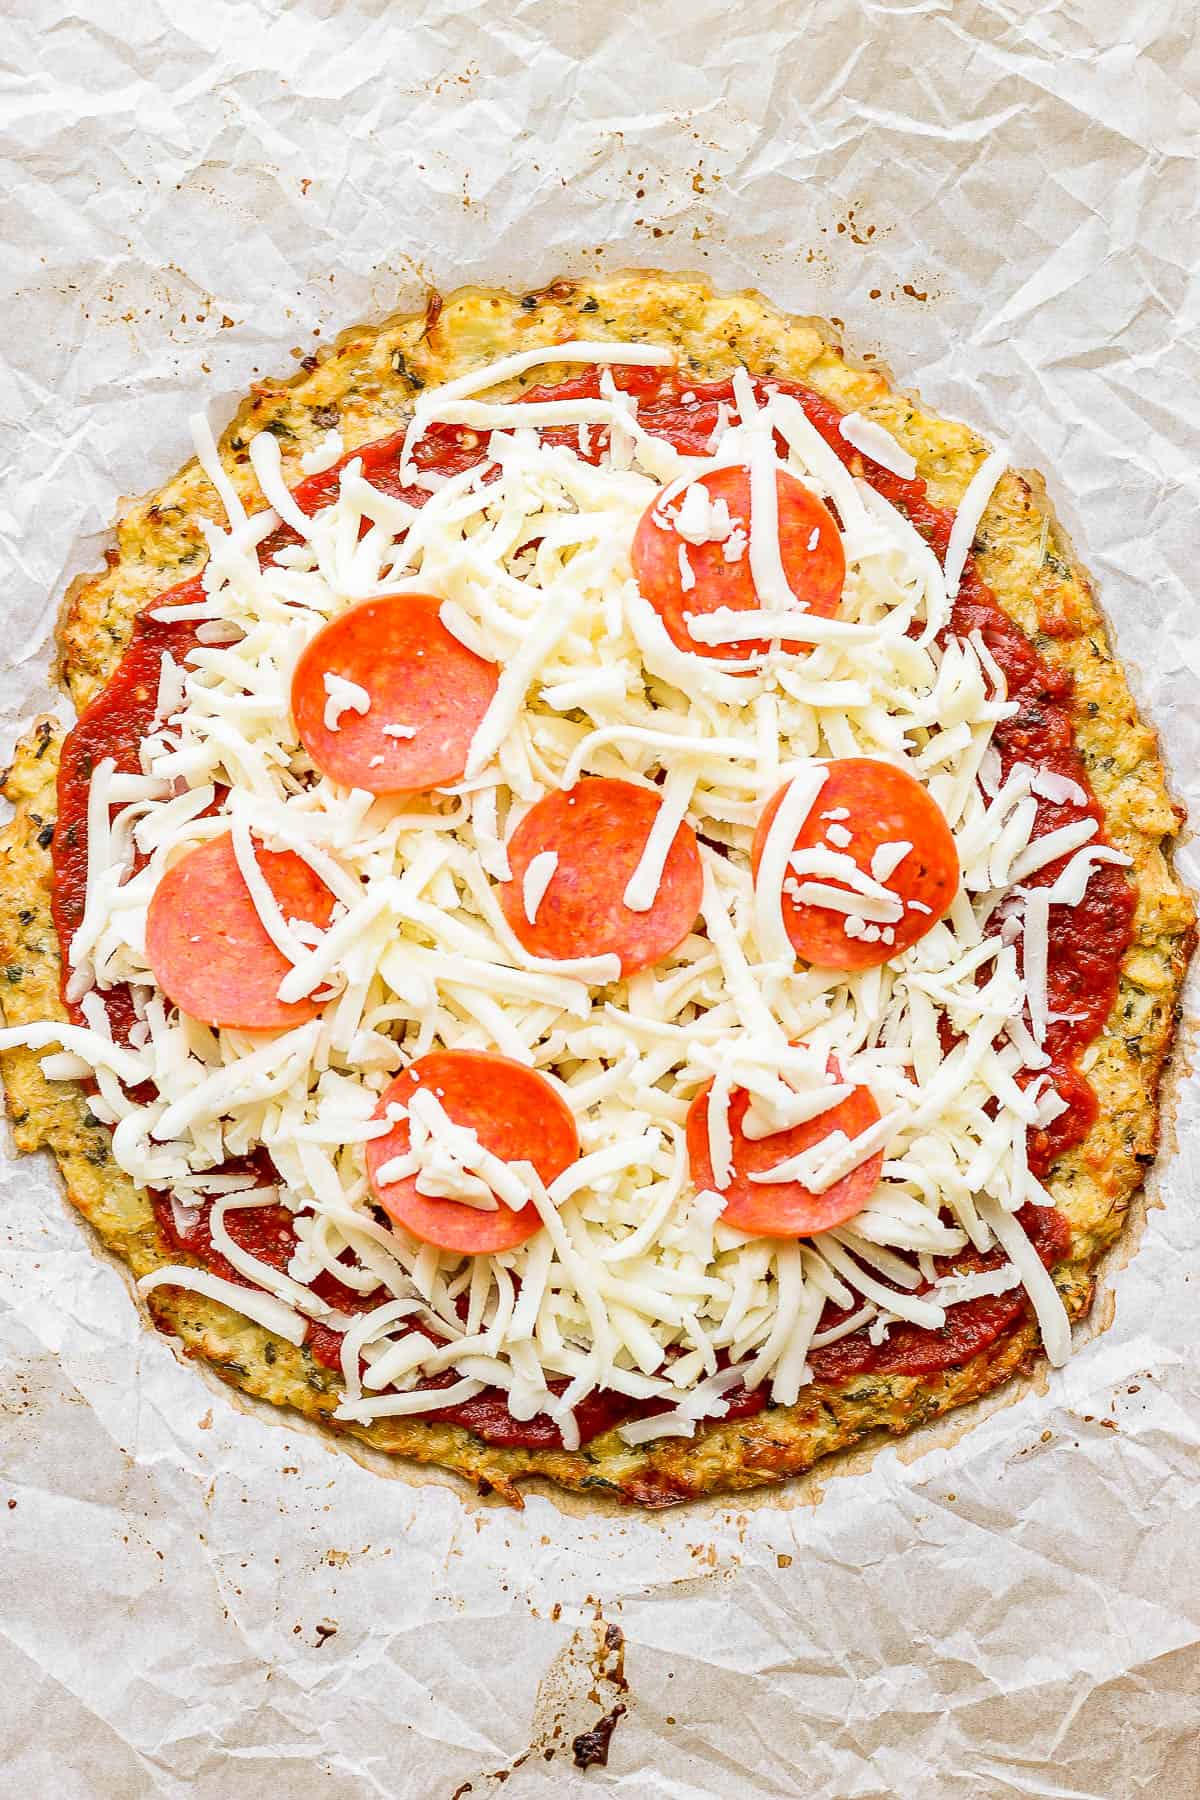 Sauce, cheese, and pepperoni added to a cauliflower pizza crust.